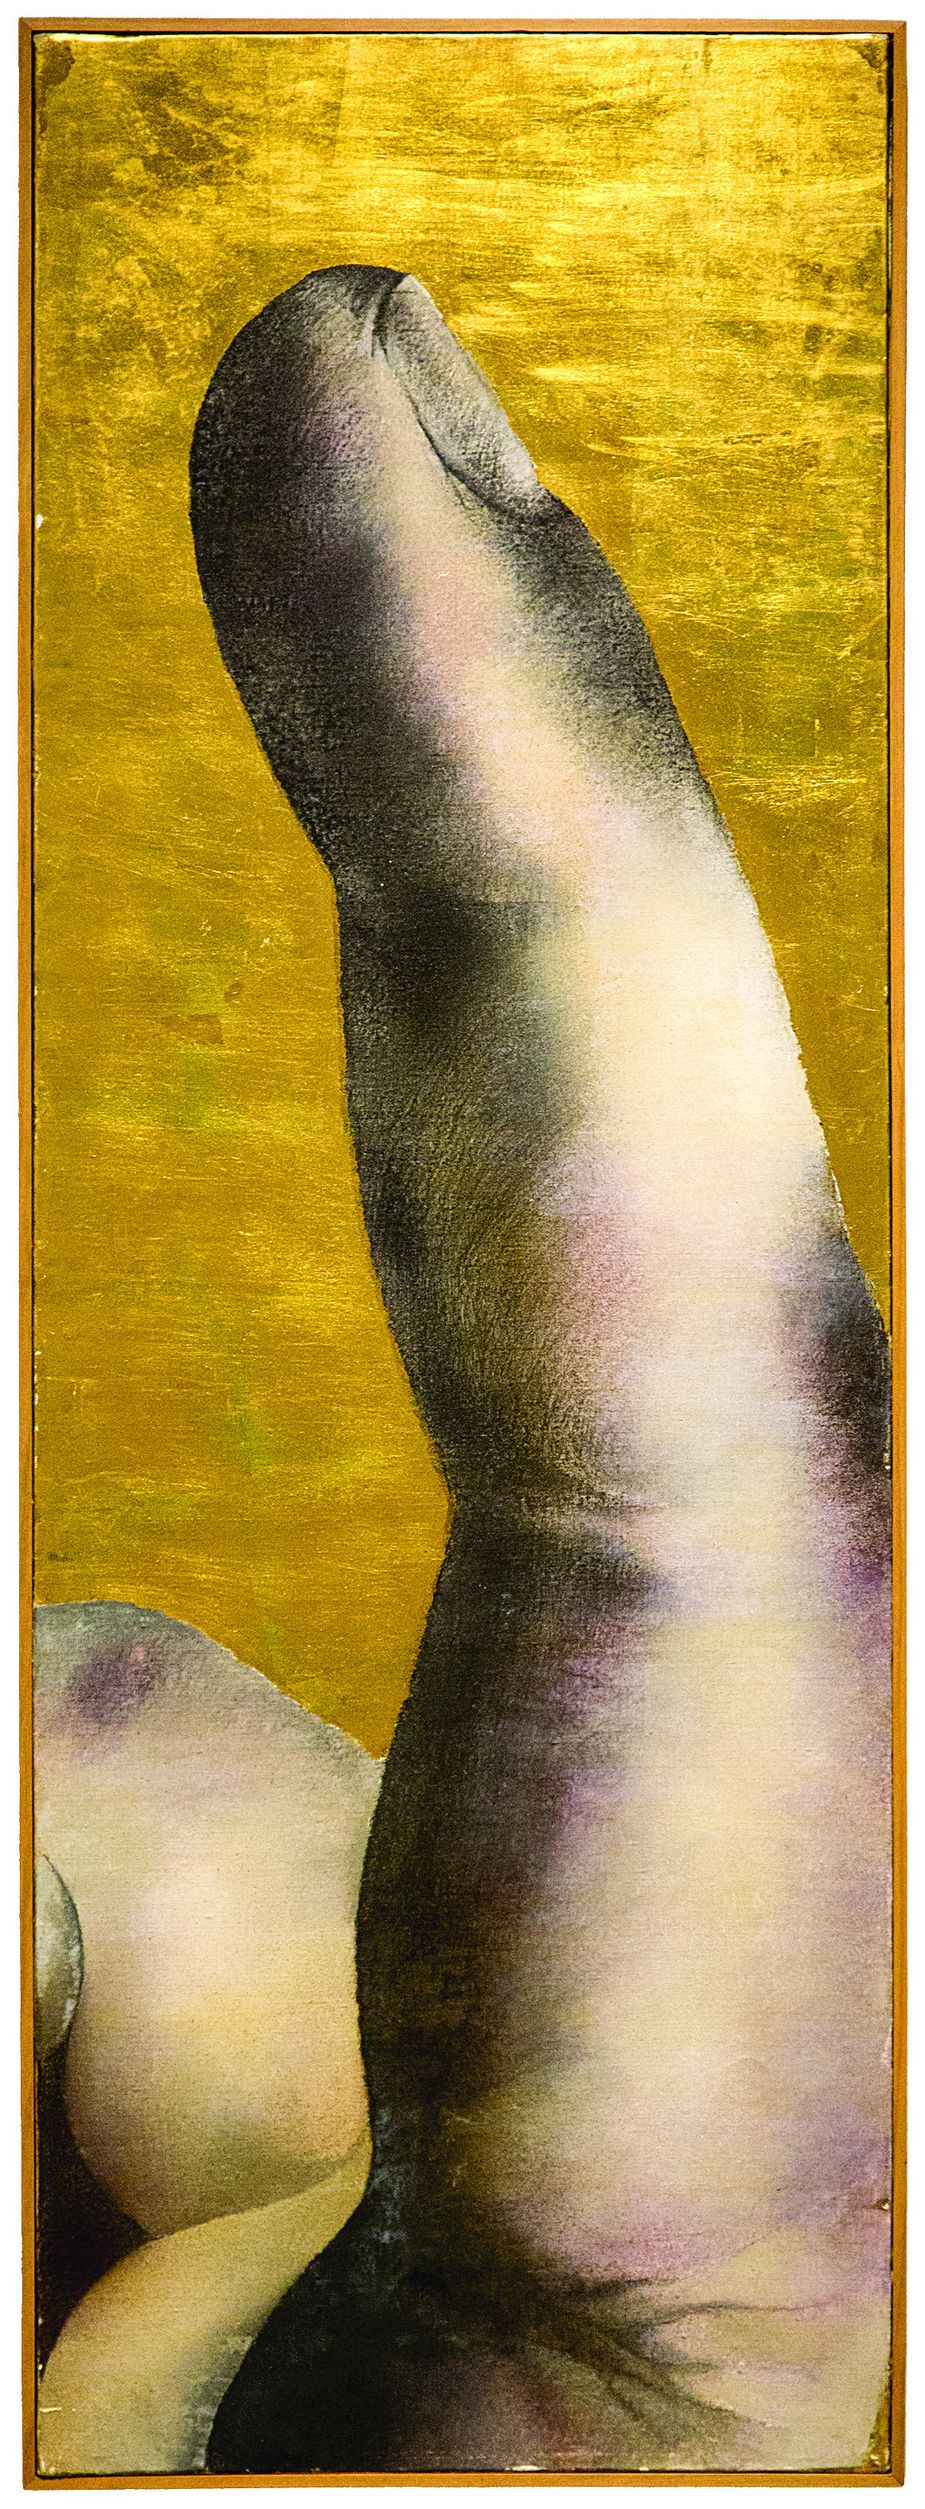 Harold first exhibited Finger of God in Venice in 1962. Though not currently on display, the painting now resides in the Oklahoma City Museum of Art's permanent collection. Photo by Lori Duckworth 